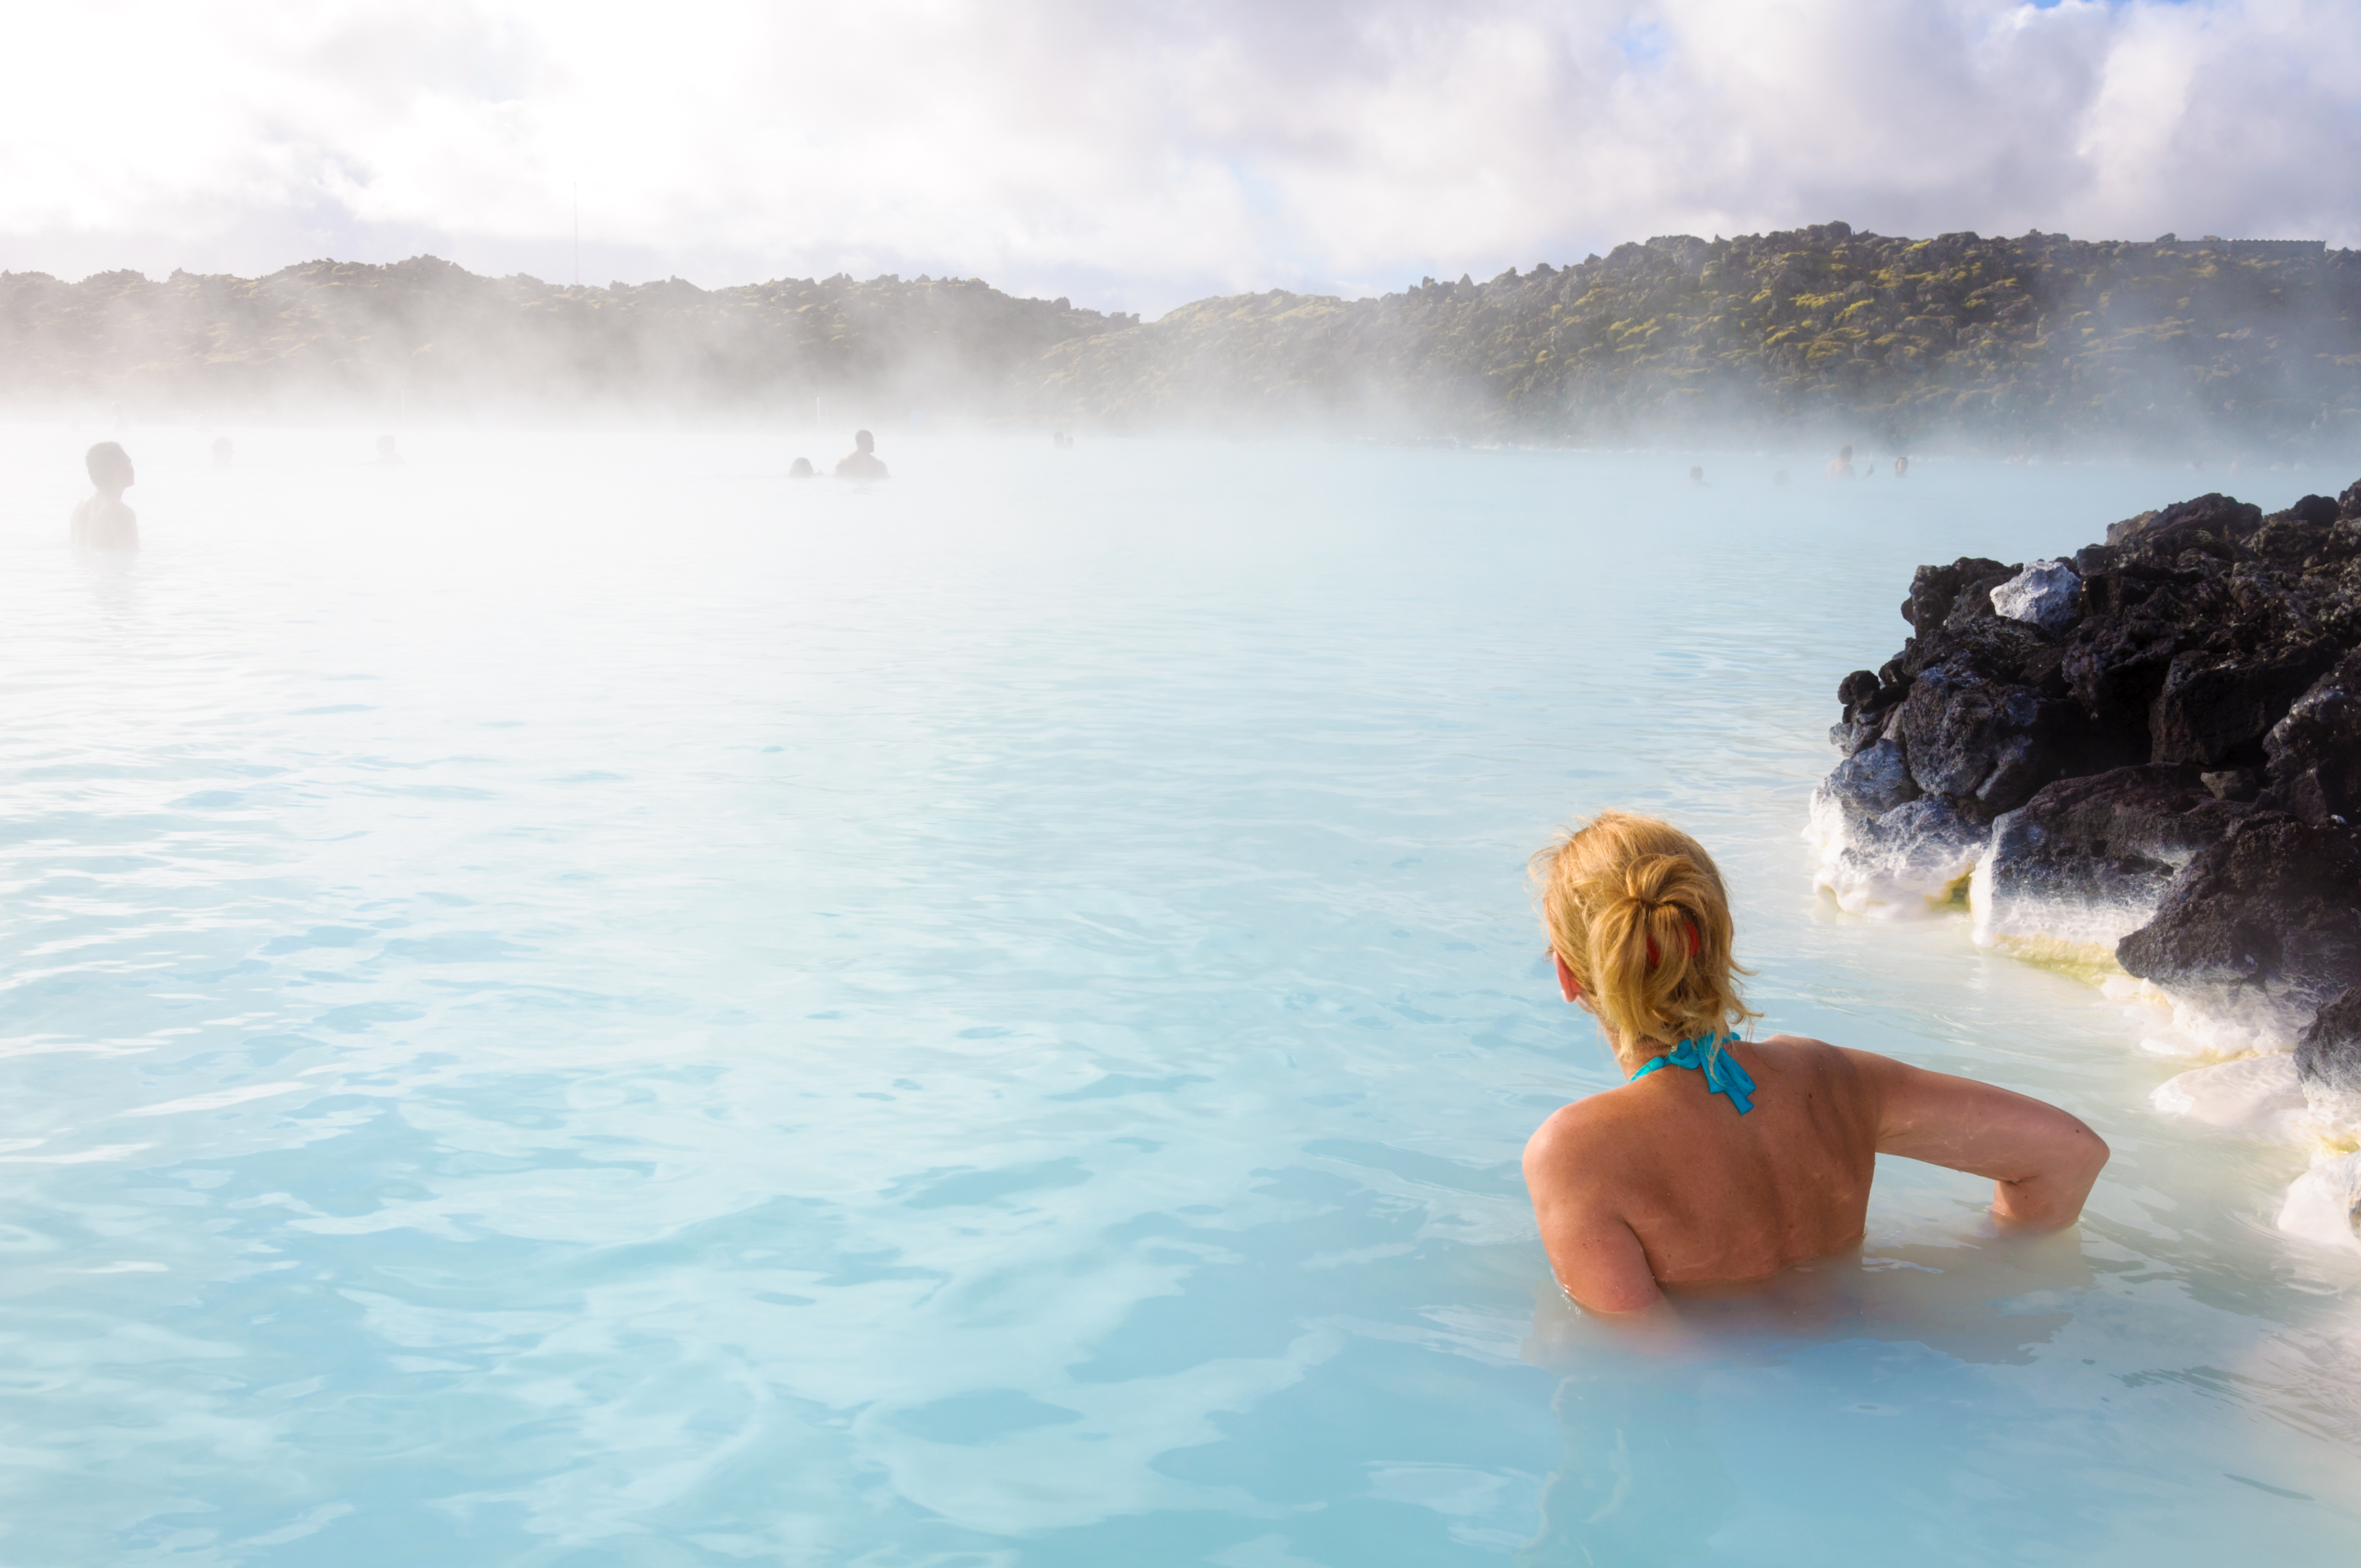 Visit an Amazing Birthday Vacation Destination with Your Family - Blue Lagoon in Iceland